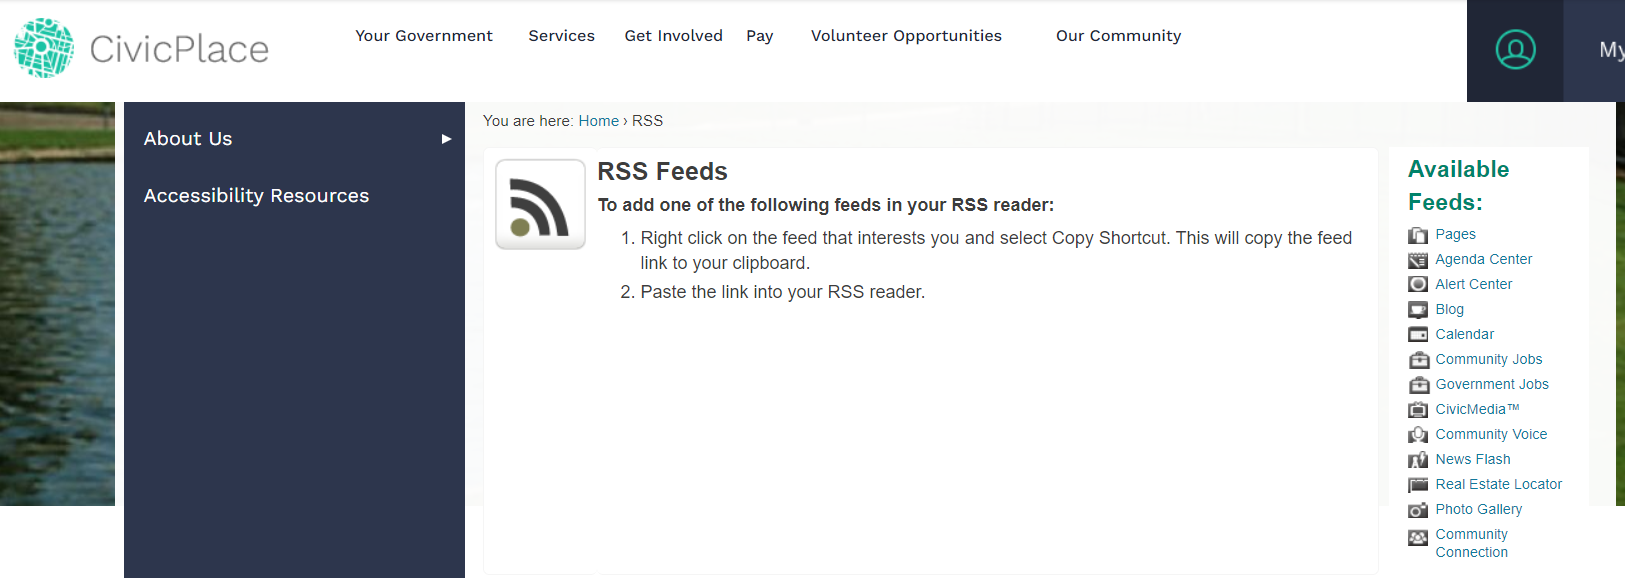 The front-end view of the Really Simple Syndication (RSS) site.